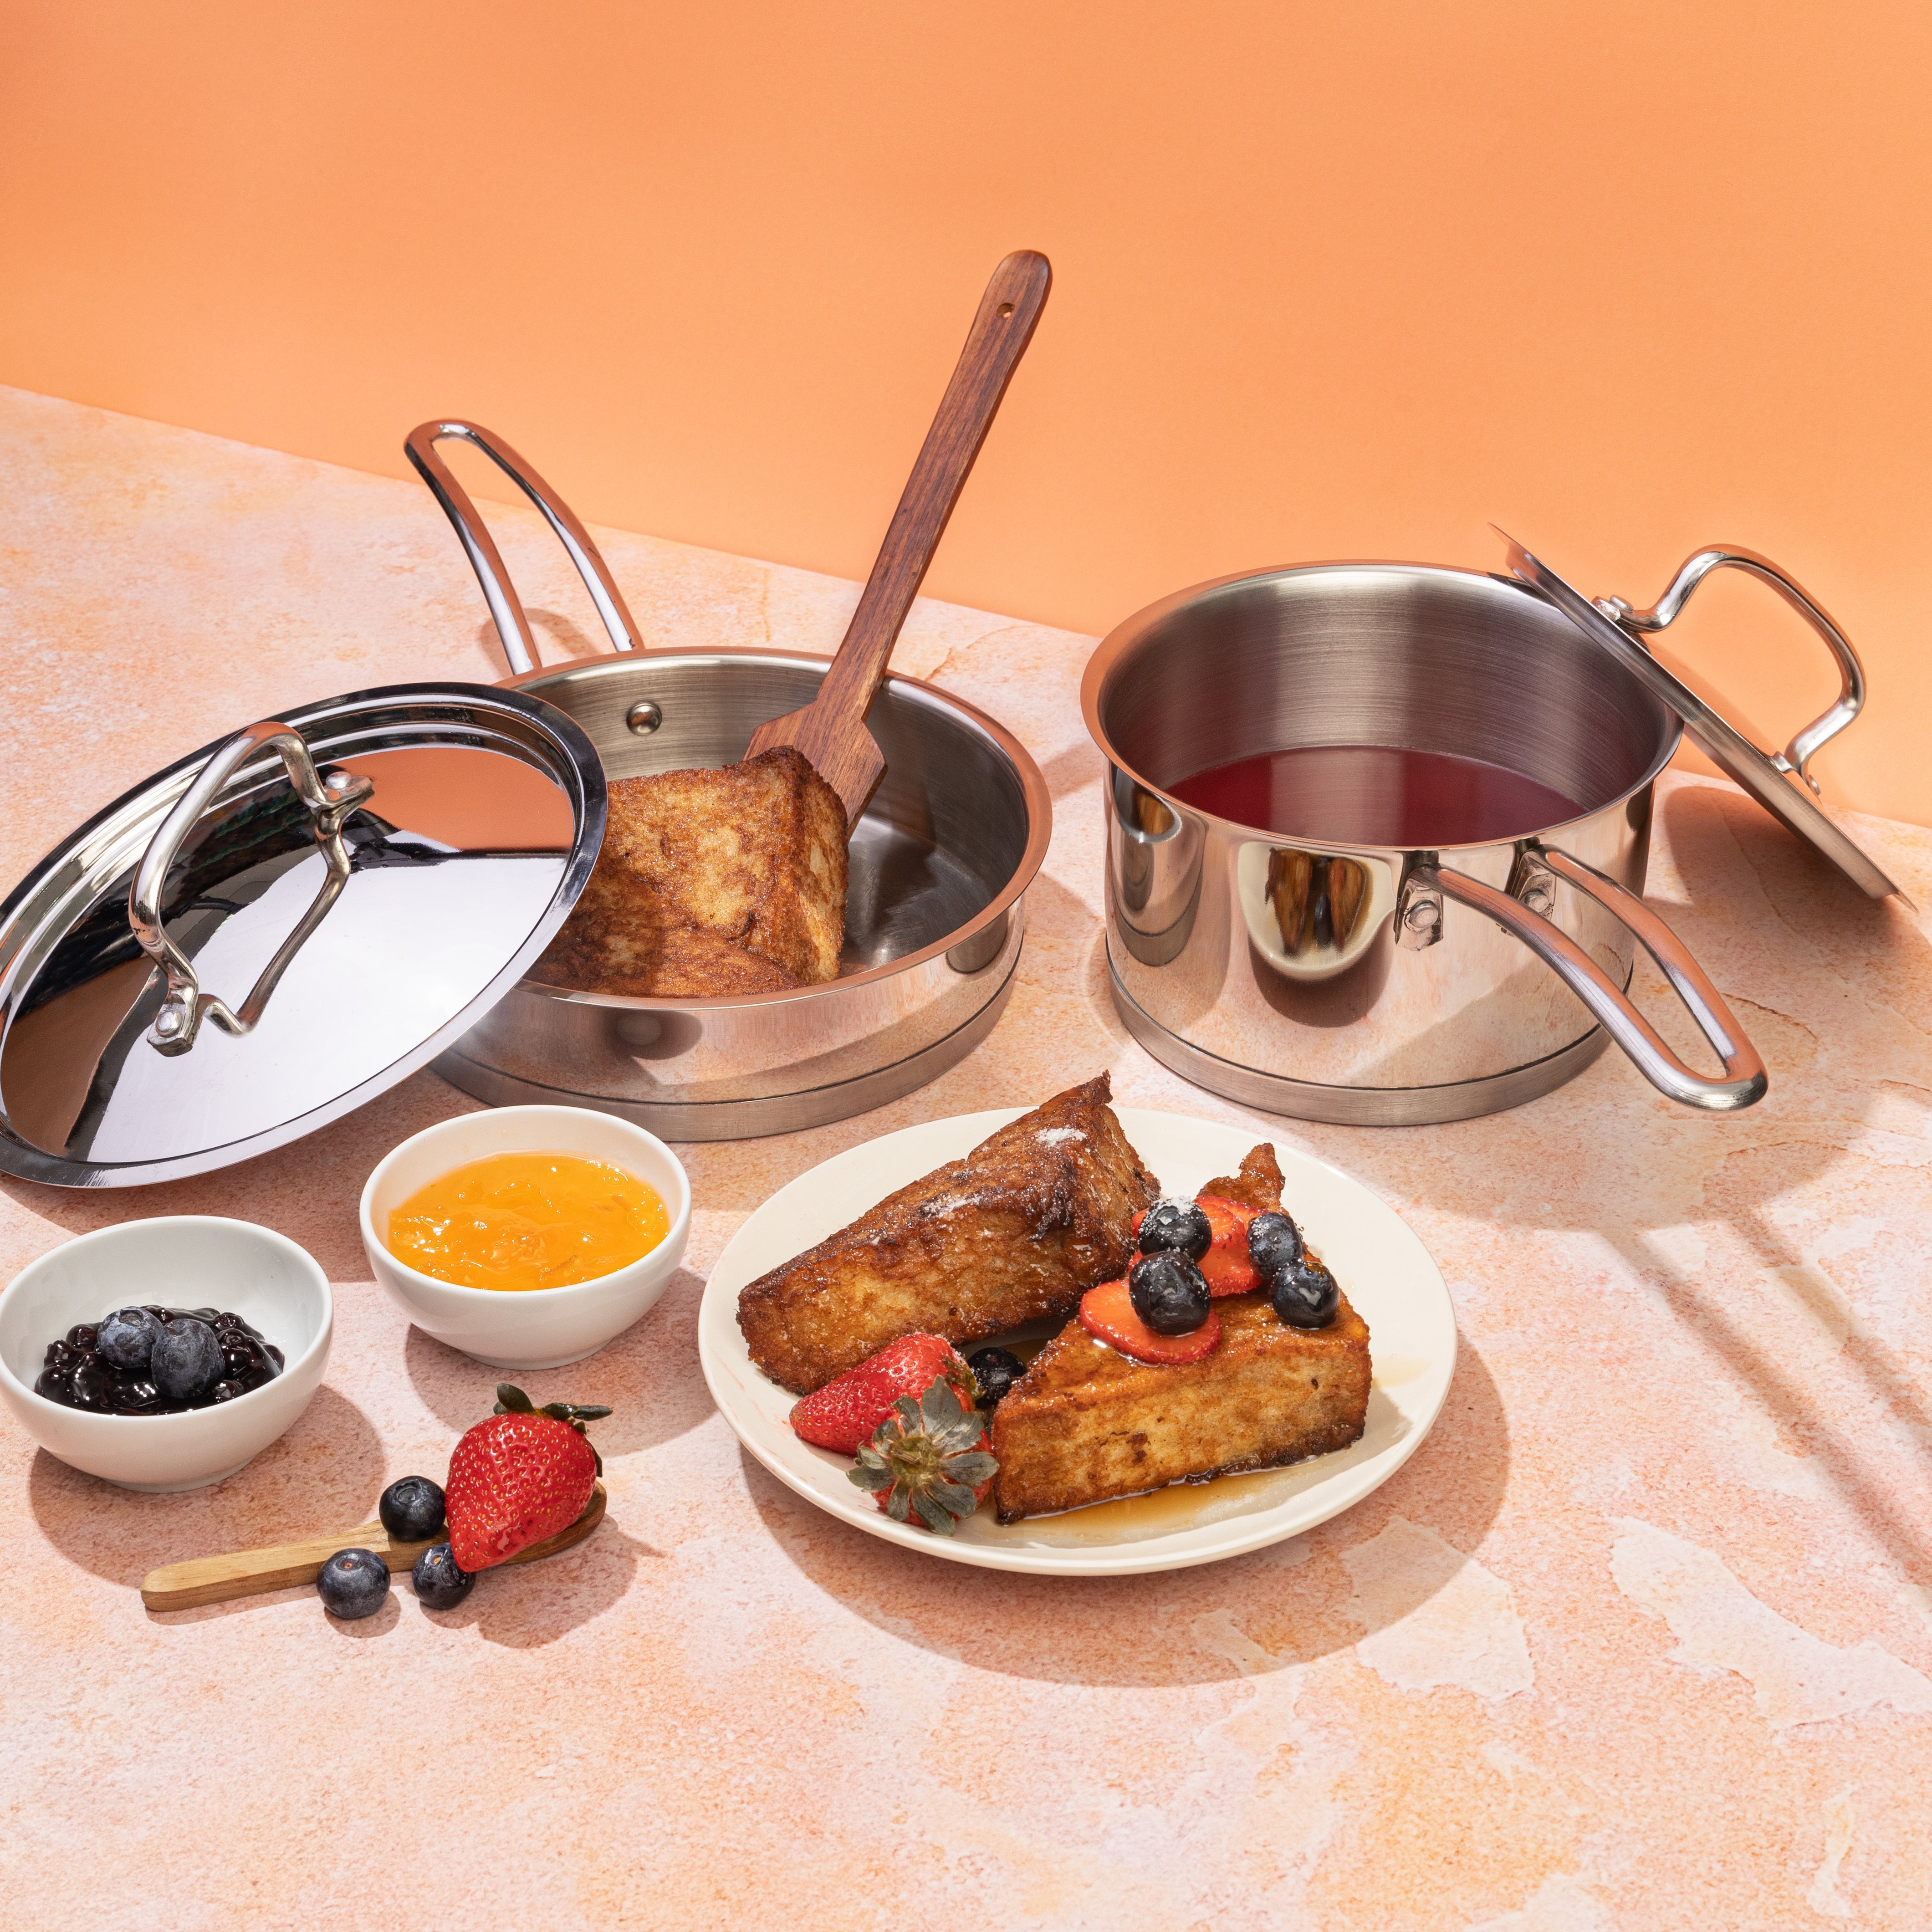 Vinod Stainless Steel Classique Deluxe Set (Induction Friendly) - 2 Pcs - Frypan with Lid and Saucepan with Lid